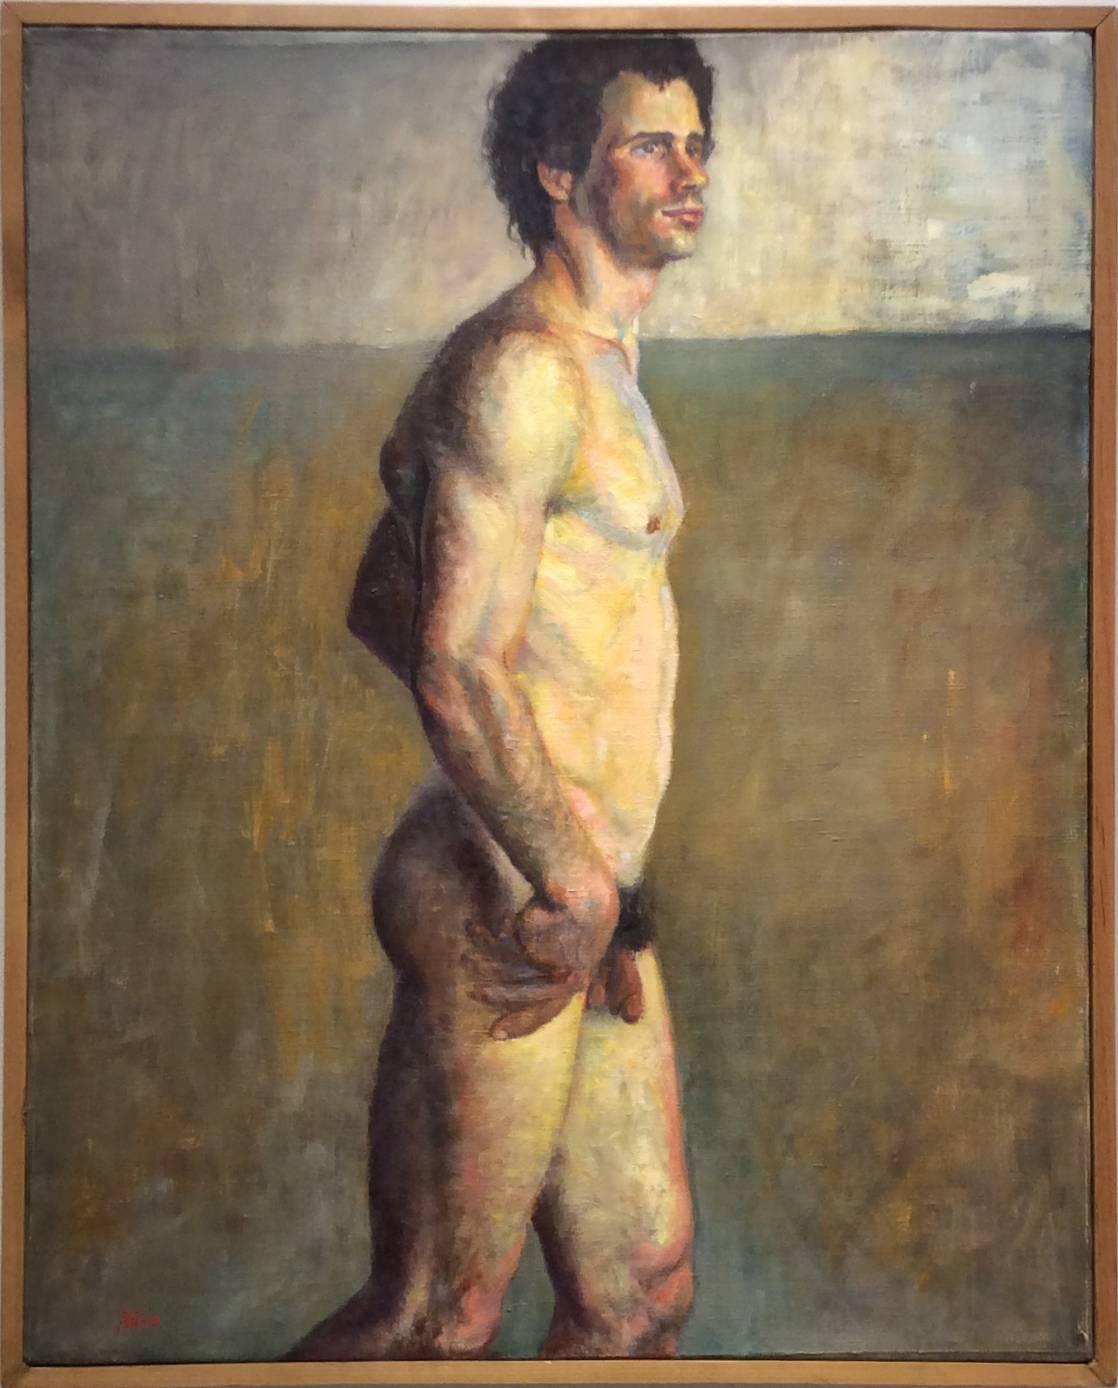 Juliet Teng Nude Painting - Untitled (Portrait of a Standing Male Nude, Oil on Canvas)